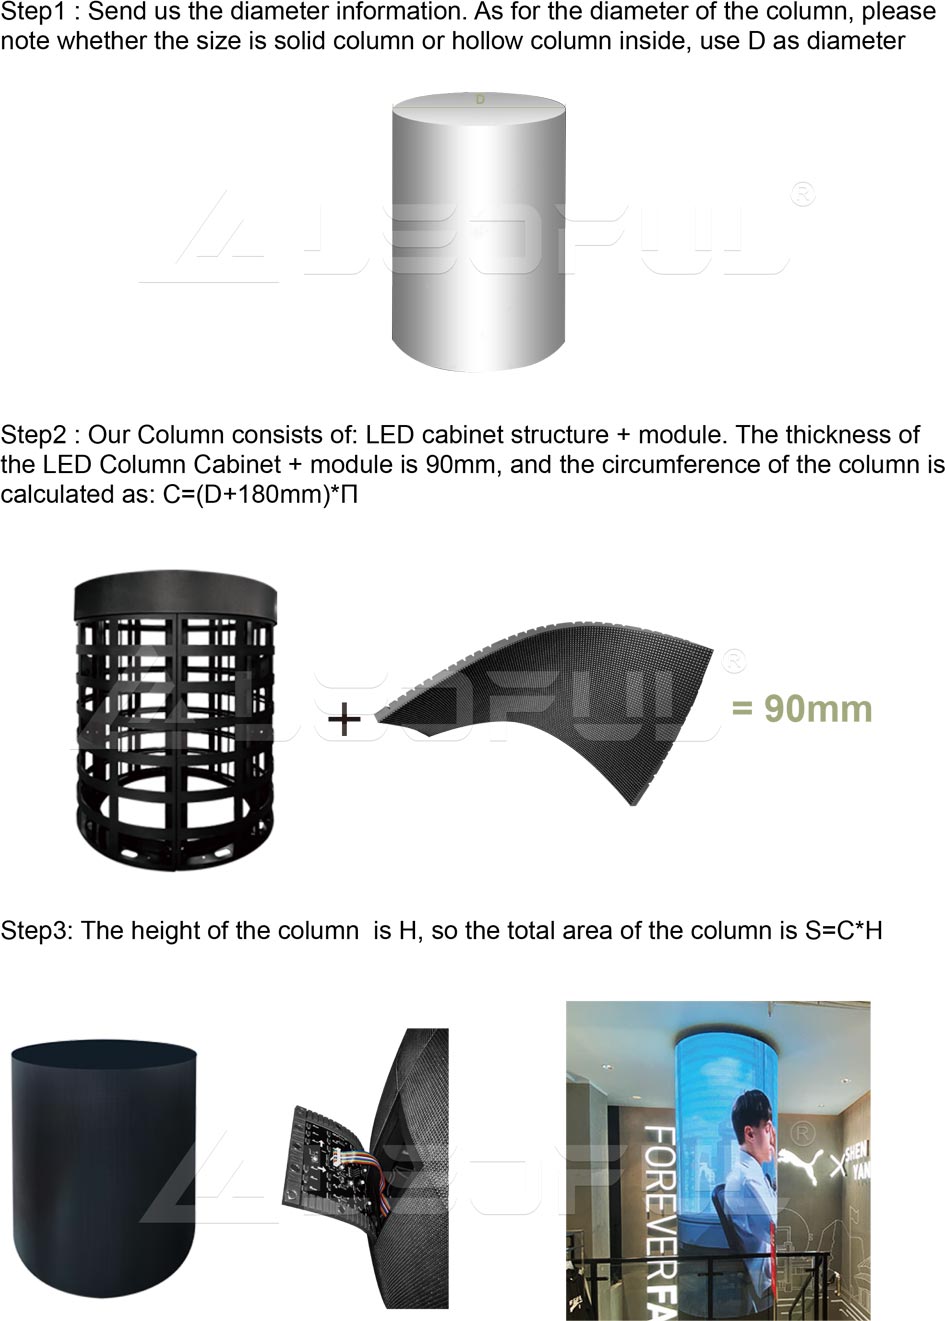 How to calculate the total screen surface area of Column Project